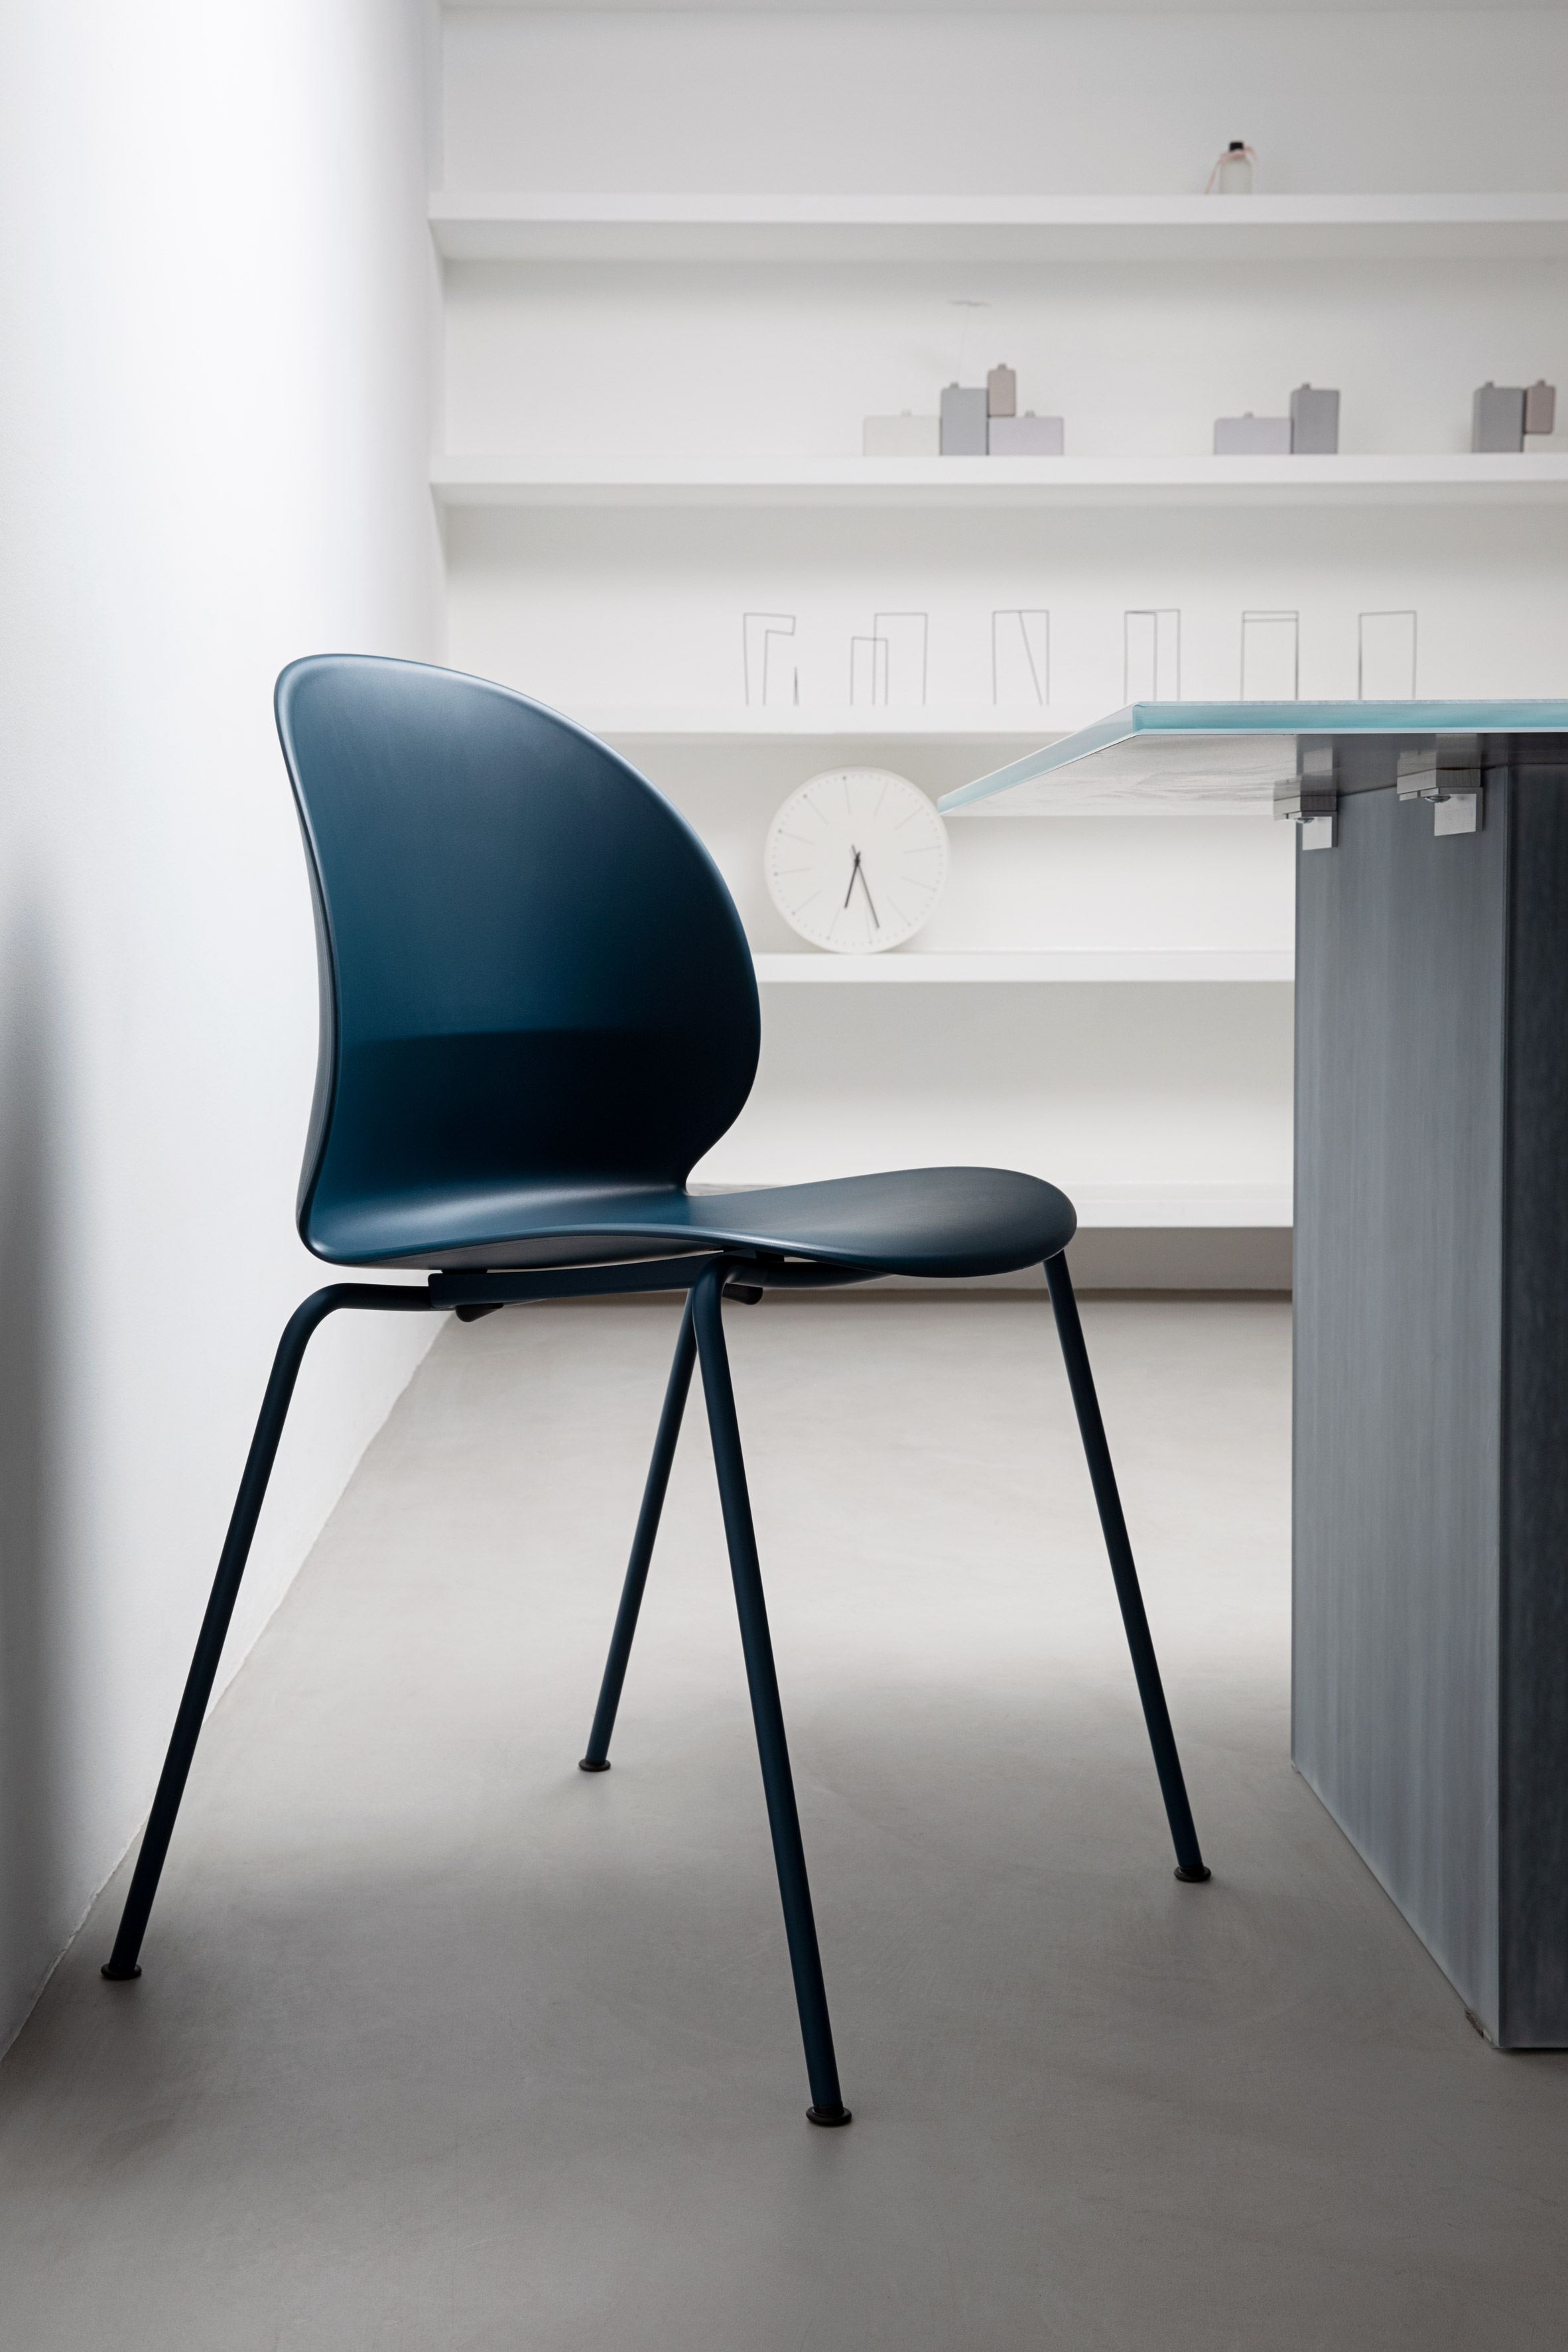 Nendo designs N02 Recycle chair for Fritz Hansen from household plastic waste